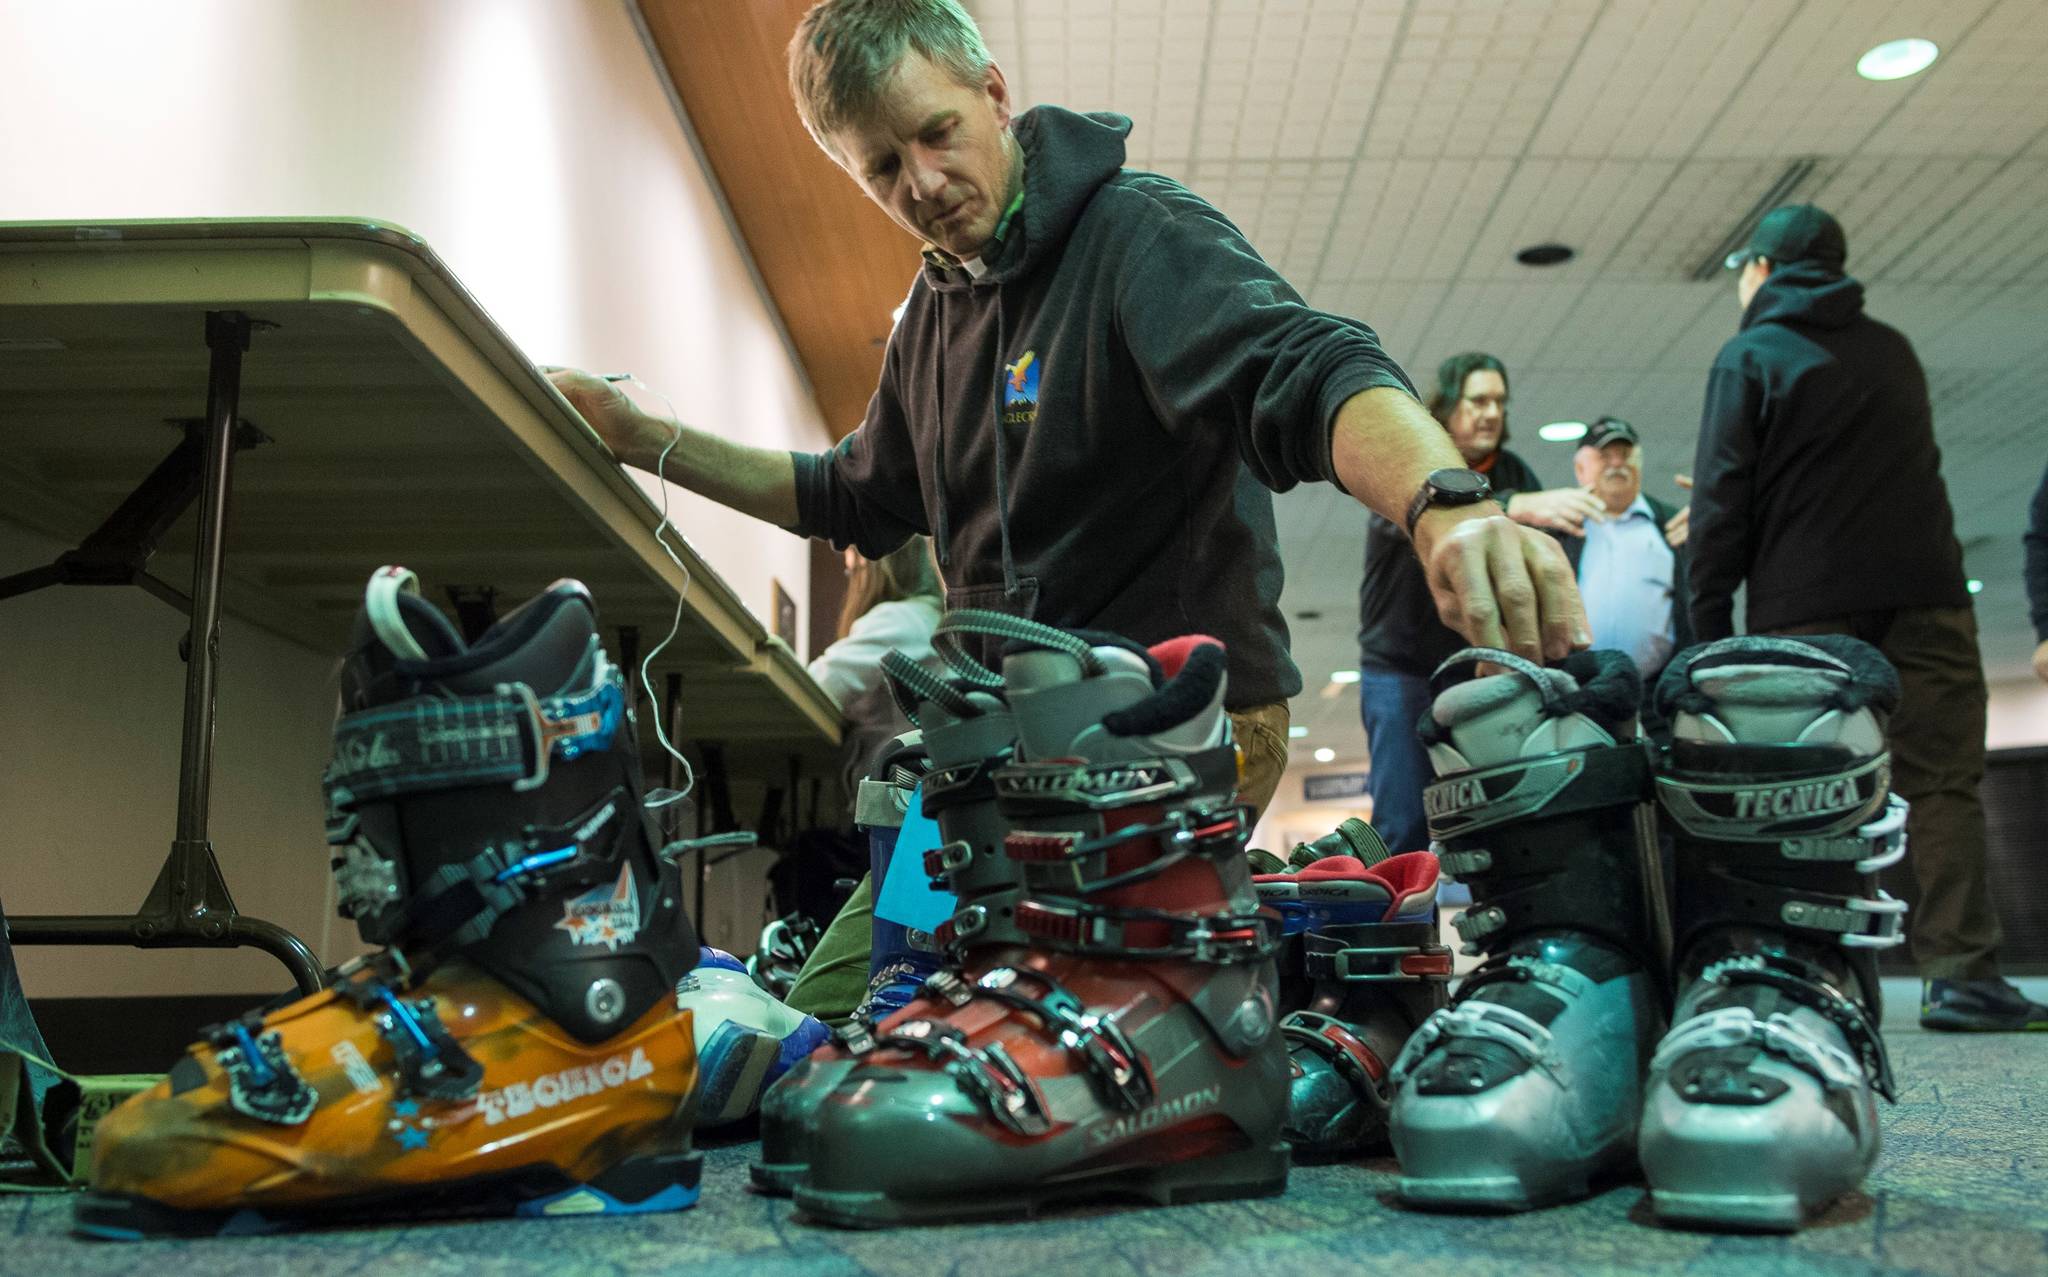 A volunteer handles ski boots to be sold at the Juneau Ski Sale on Saturday. (Michael Penn | Juneau Empire)